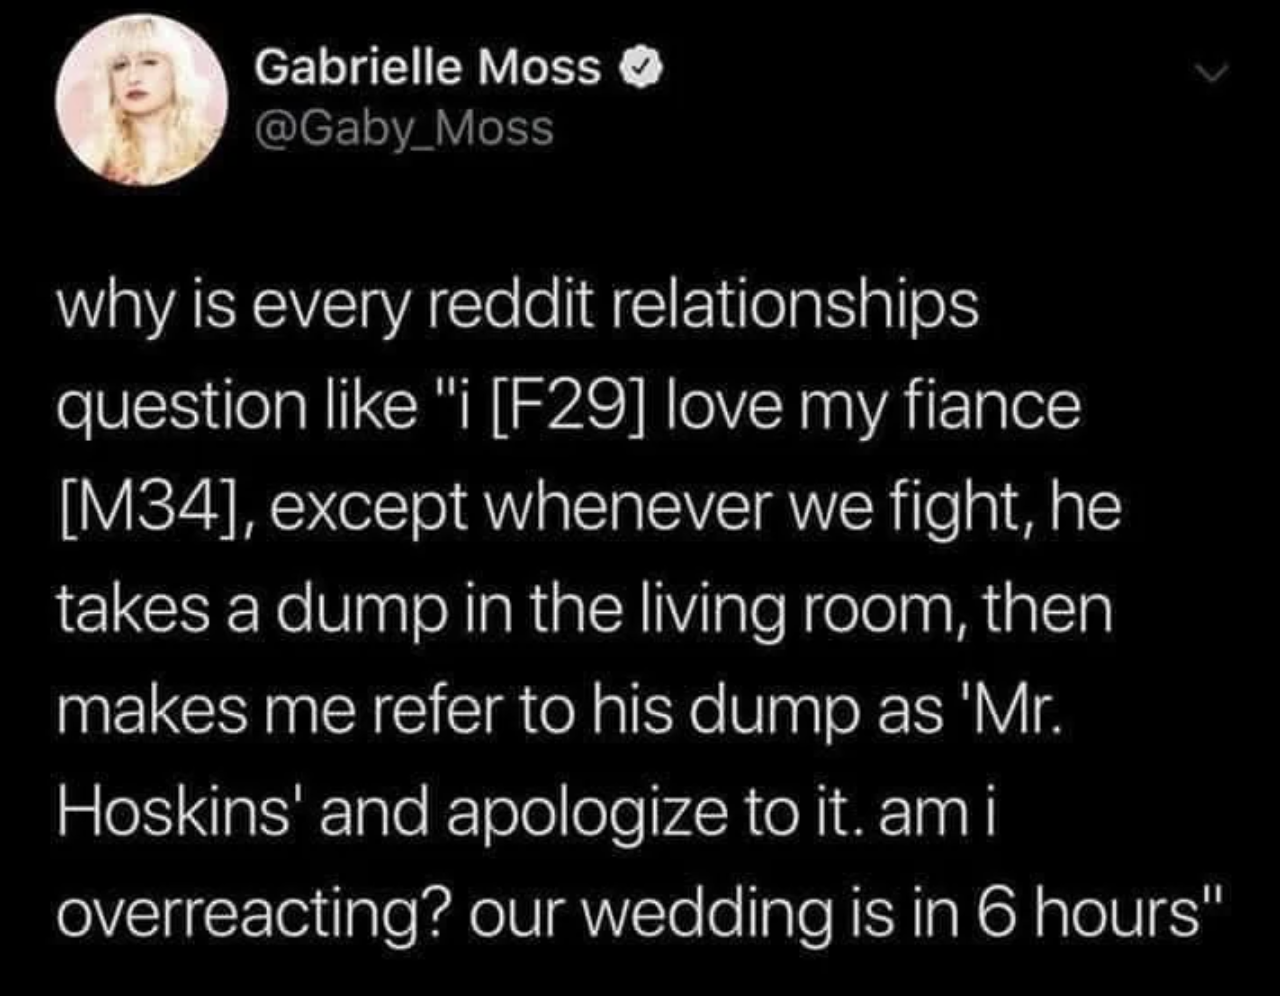 reddit relationships - Gabrielle Moss why is every reddit relationships question "i F29 love my fiance M34, except whenever we fight, he takes a dump in the living room, then makes me refer to his dump as 'Mr. Hoskins' and apologize to it. am i overreacti